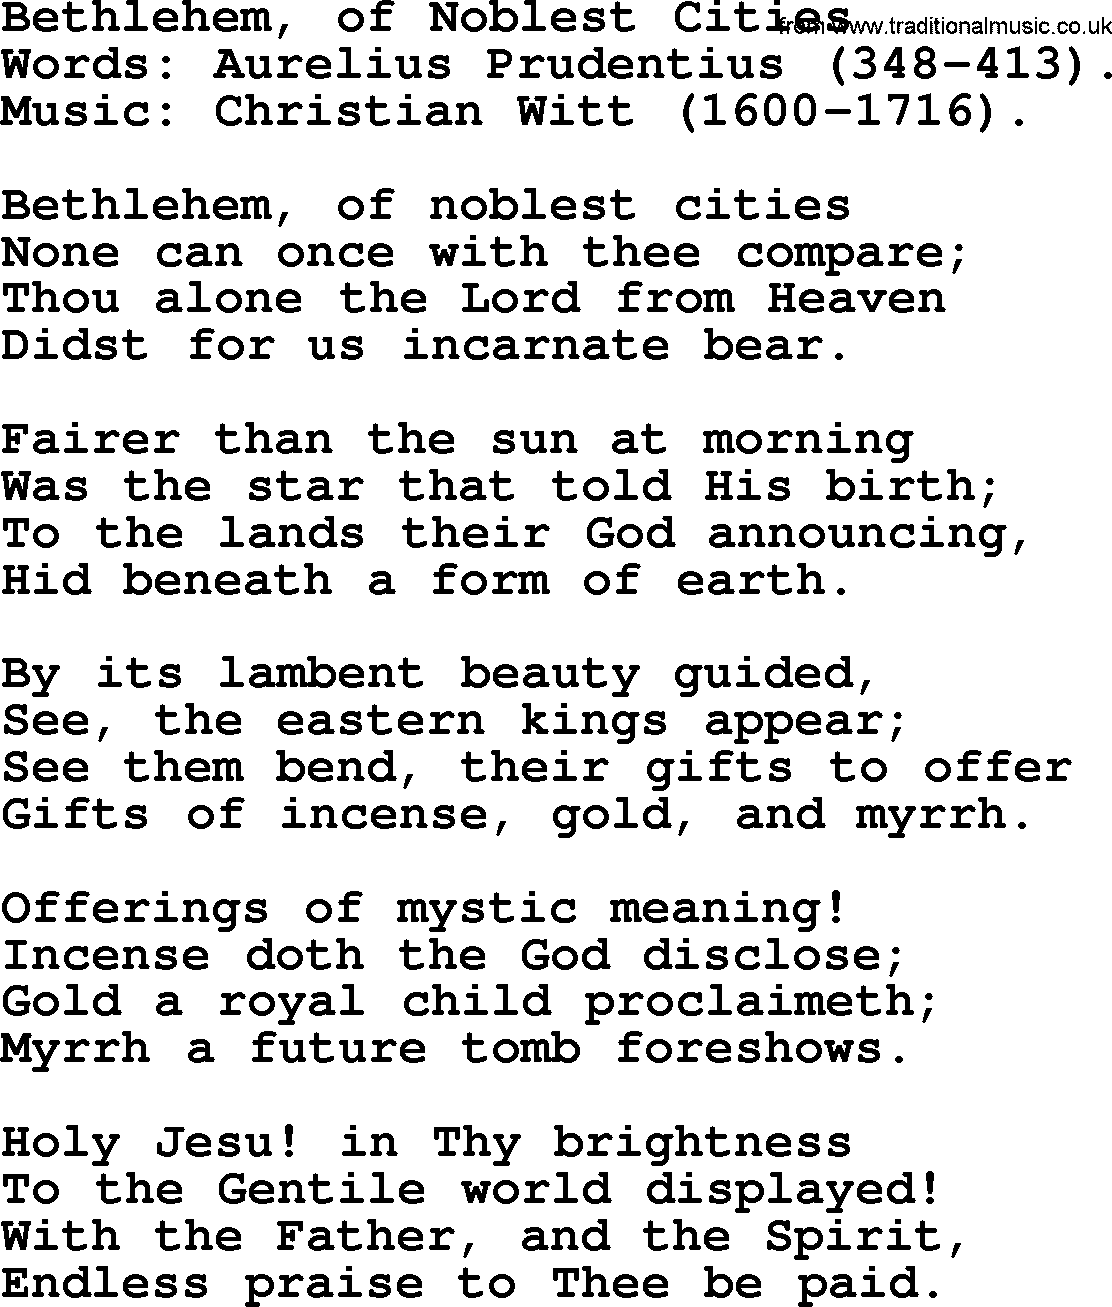 Christmas Hymns, Carols and Songs, title: Bethlehem, Of Noblest Cities, lyrics with PDF